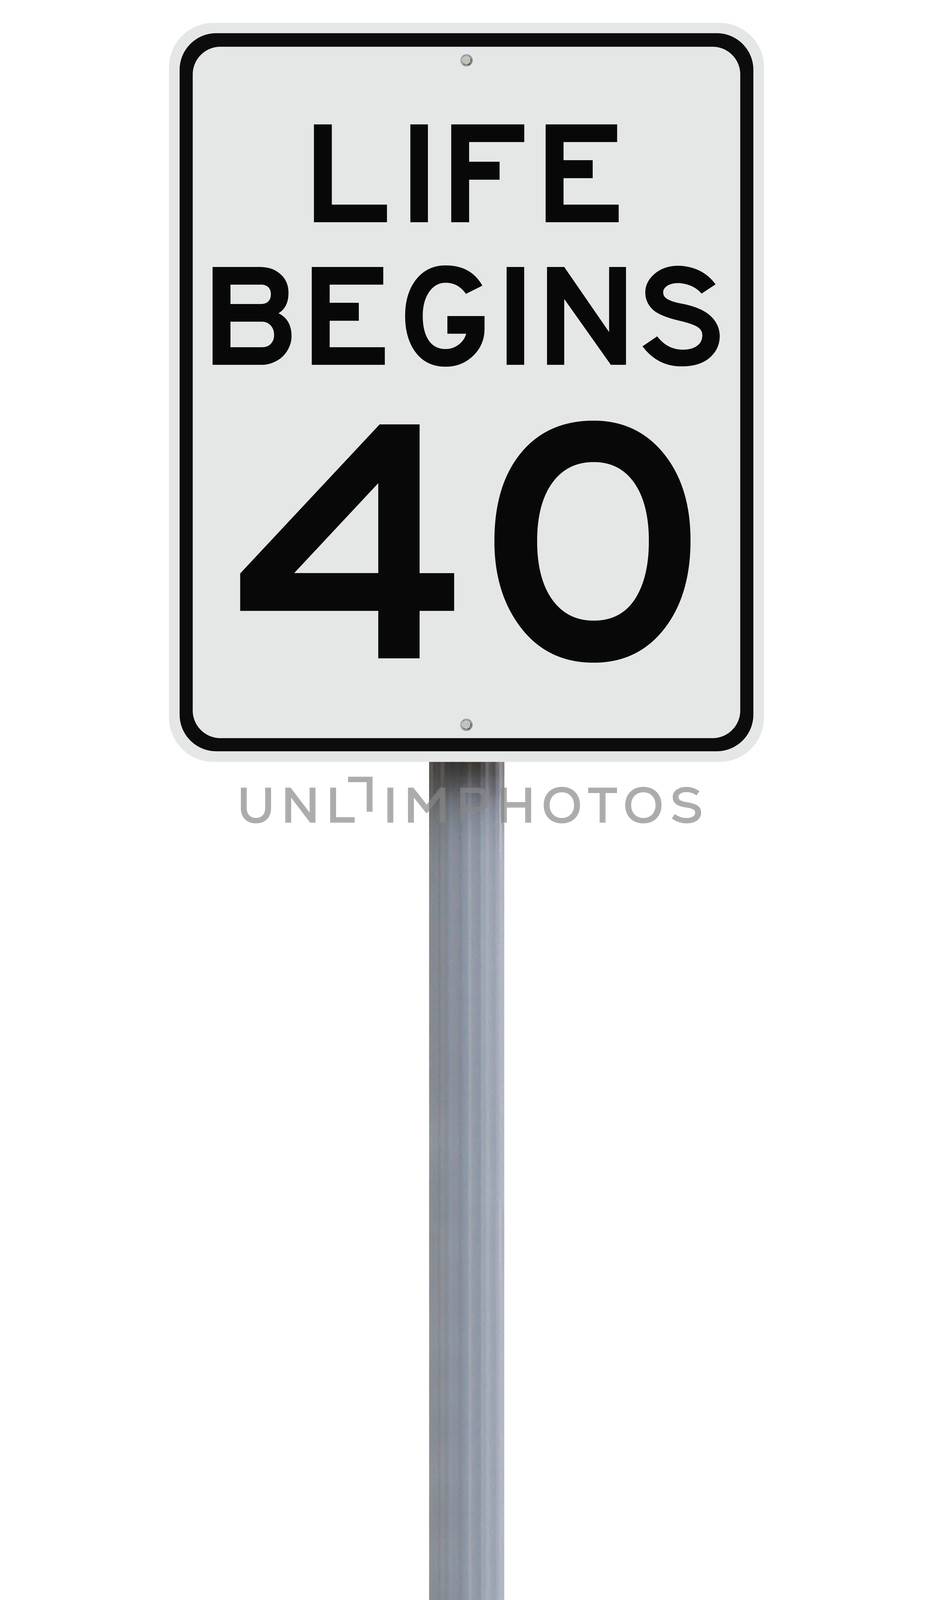 A modified speed limit sign indicating Life Begins at Forty